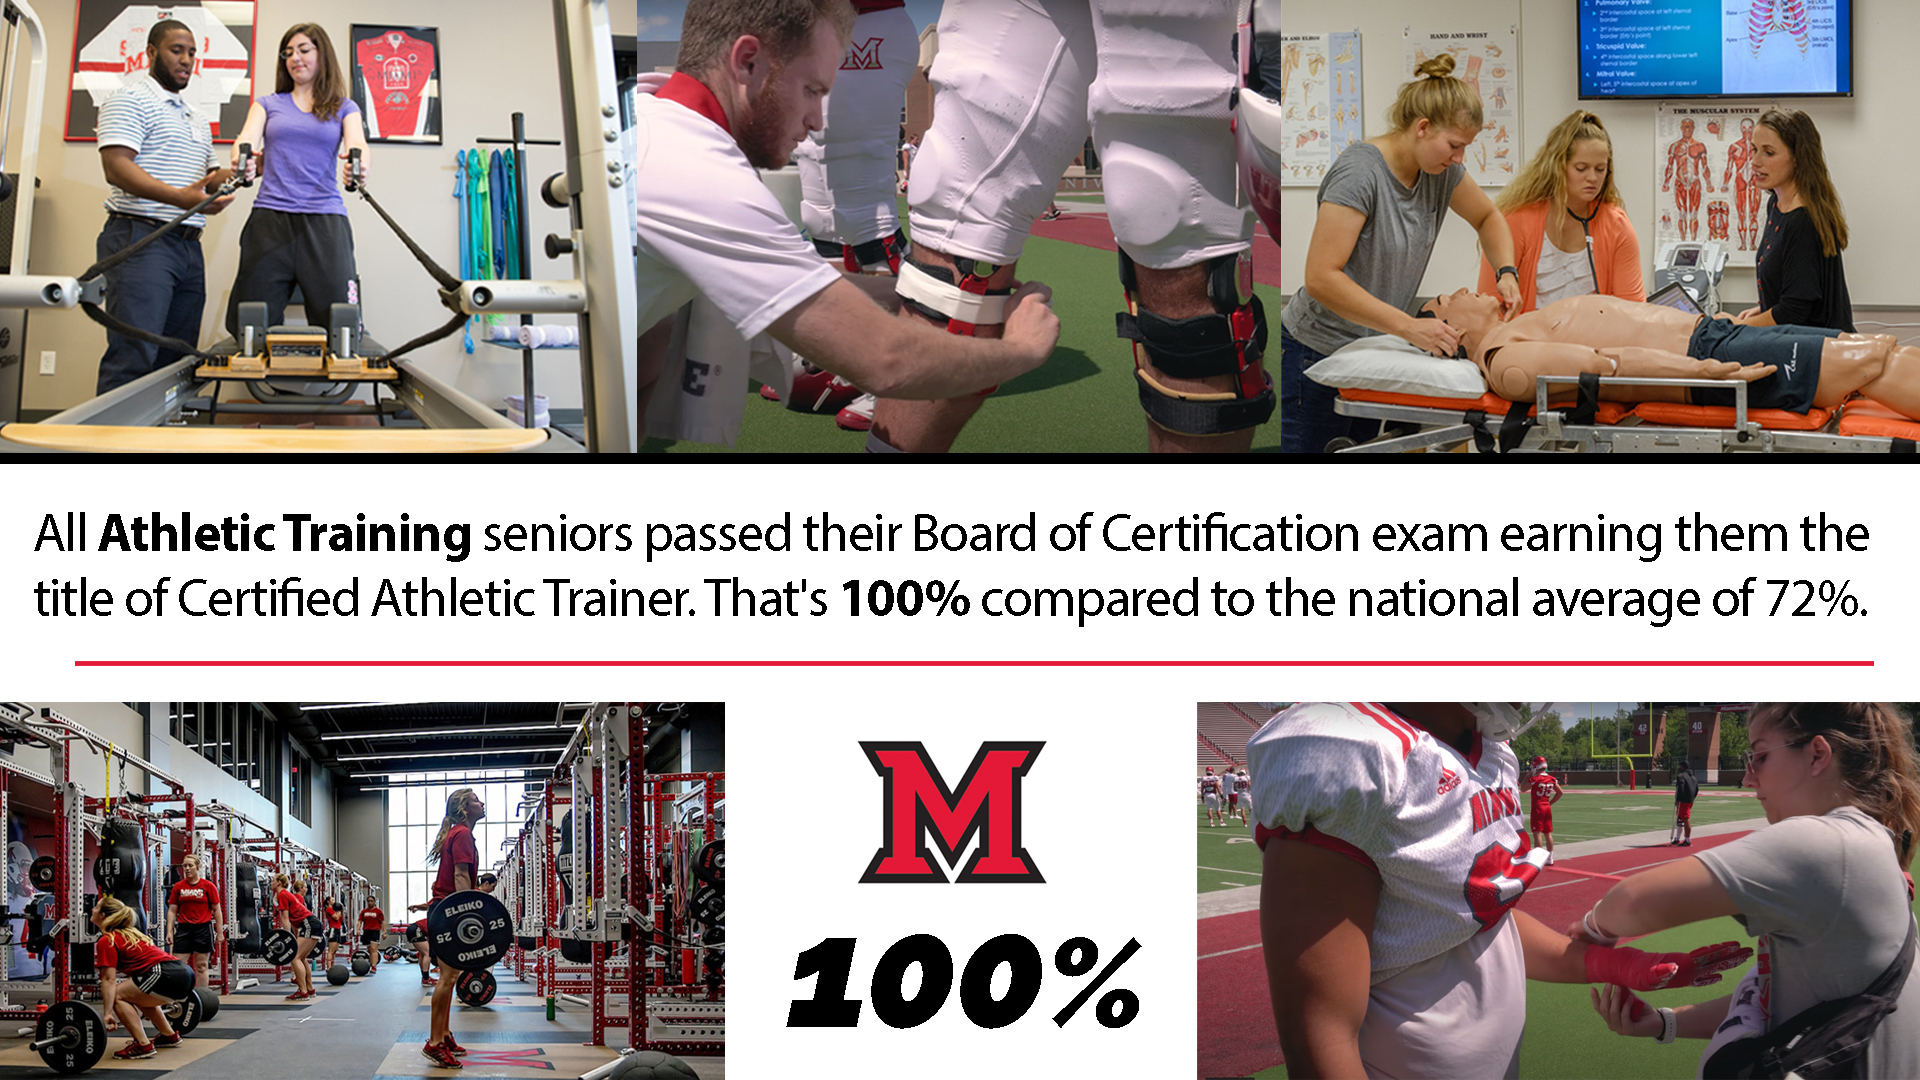 All Athletic Training seniors passed their Board of Certification exam earning them the title of Certified Athletic Trainer. That's 100% compared to the national average of 72%